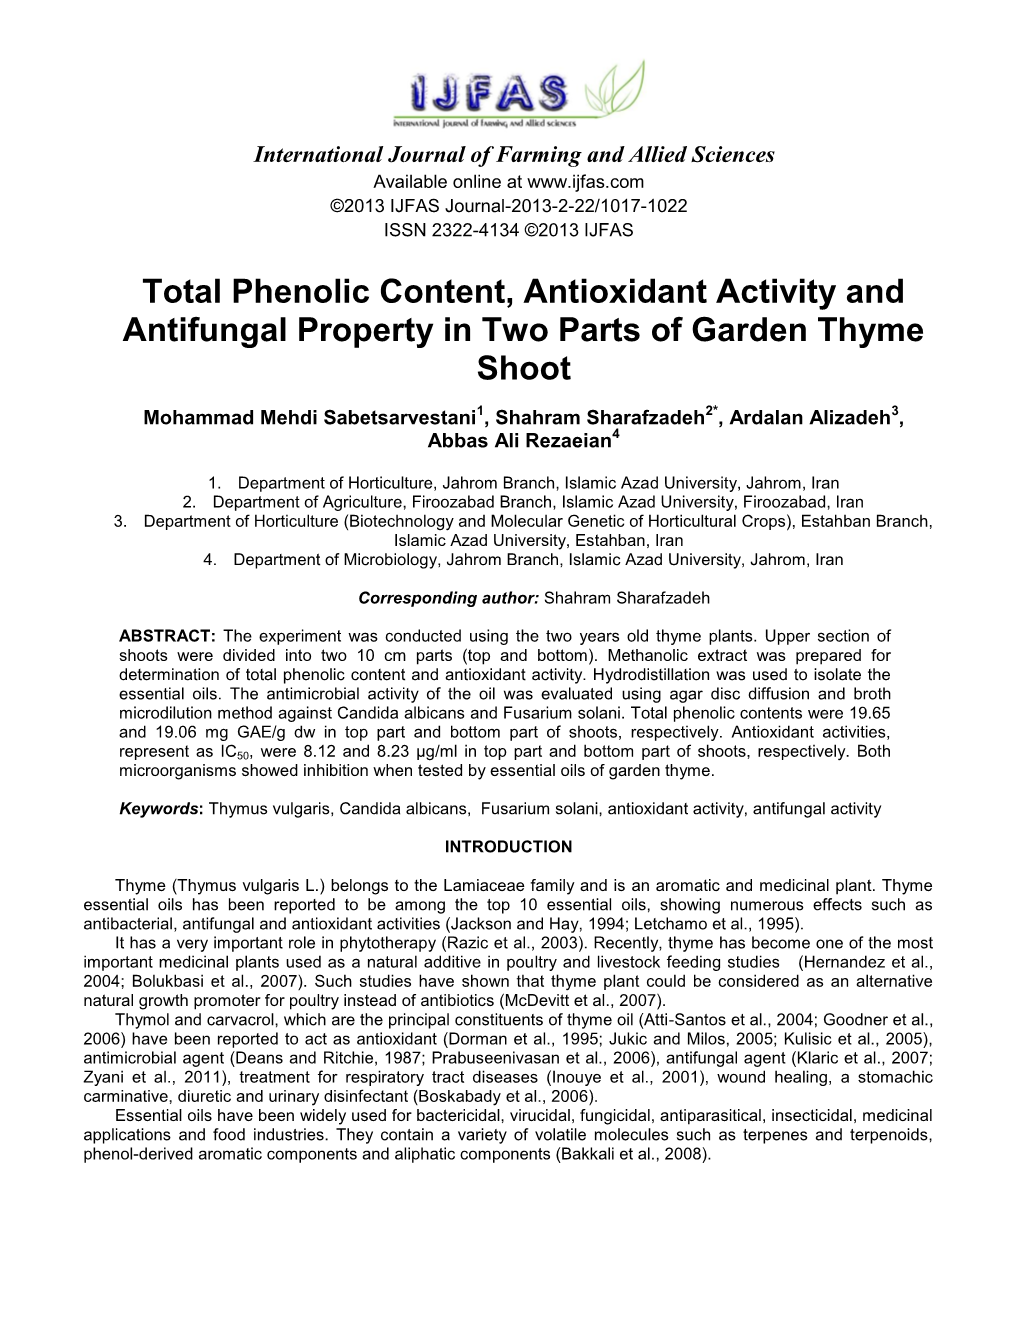 Total Phenolic Content, Antioxidant Activity and Antifungal Property in Two Parts of Garden Thyme Shoot